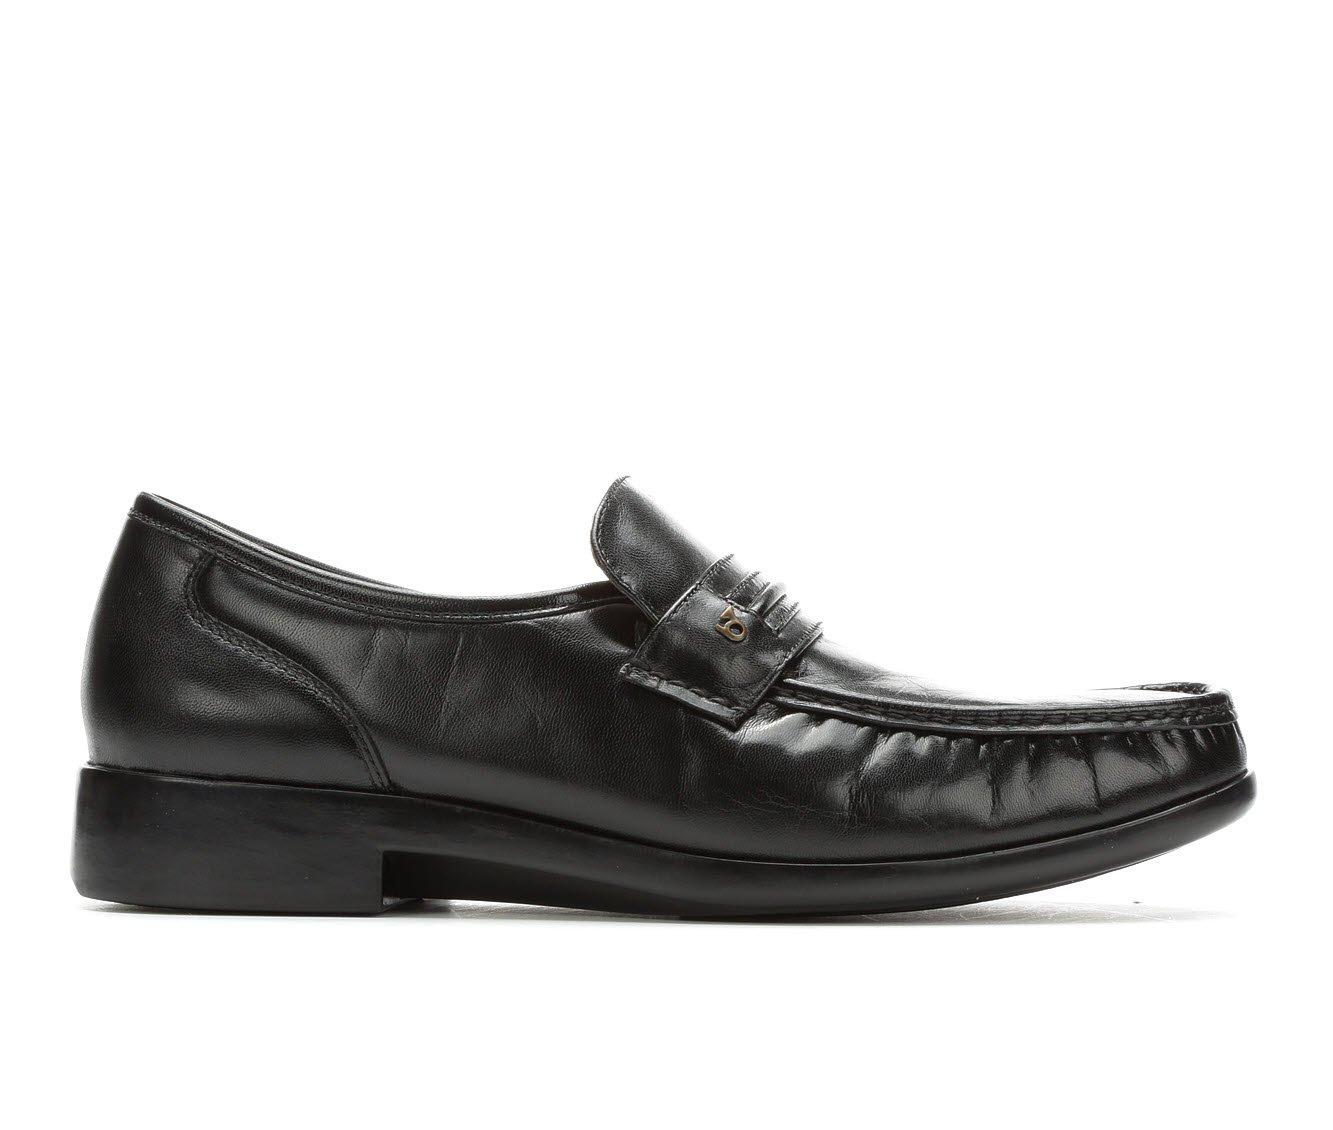 Dress Shoes for Men, Loafers, Oxfords | Shoe Carnival